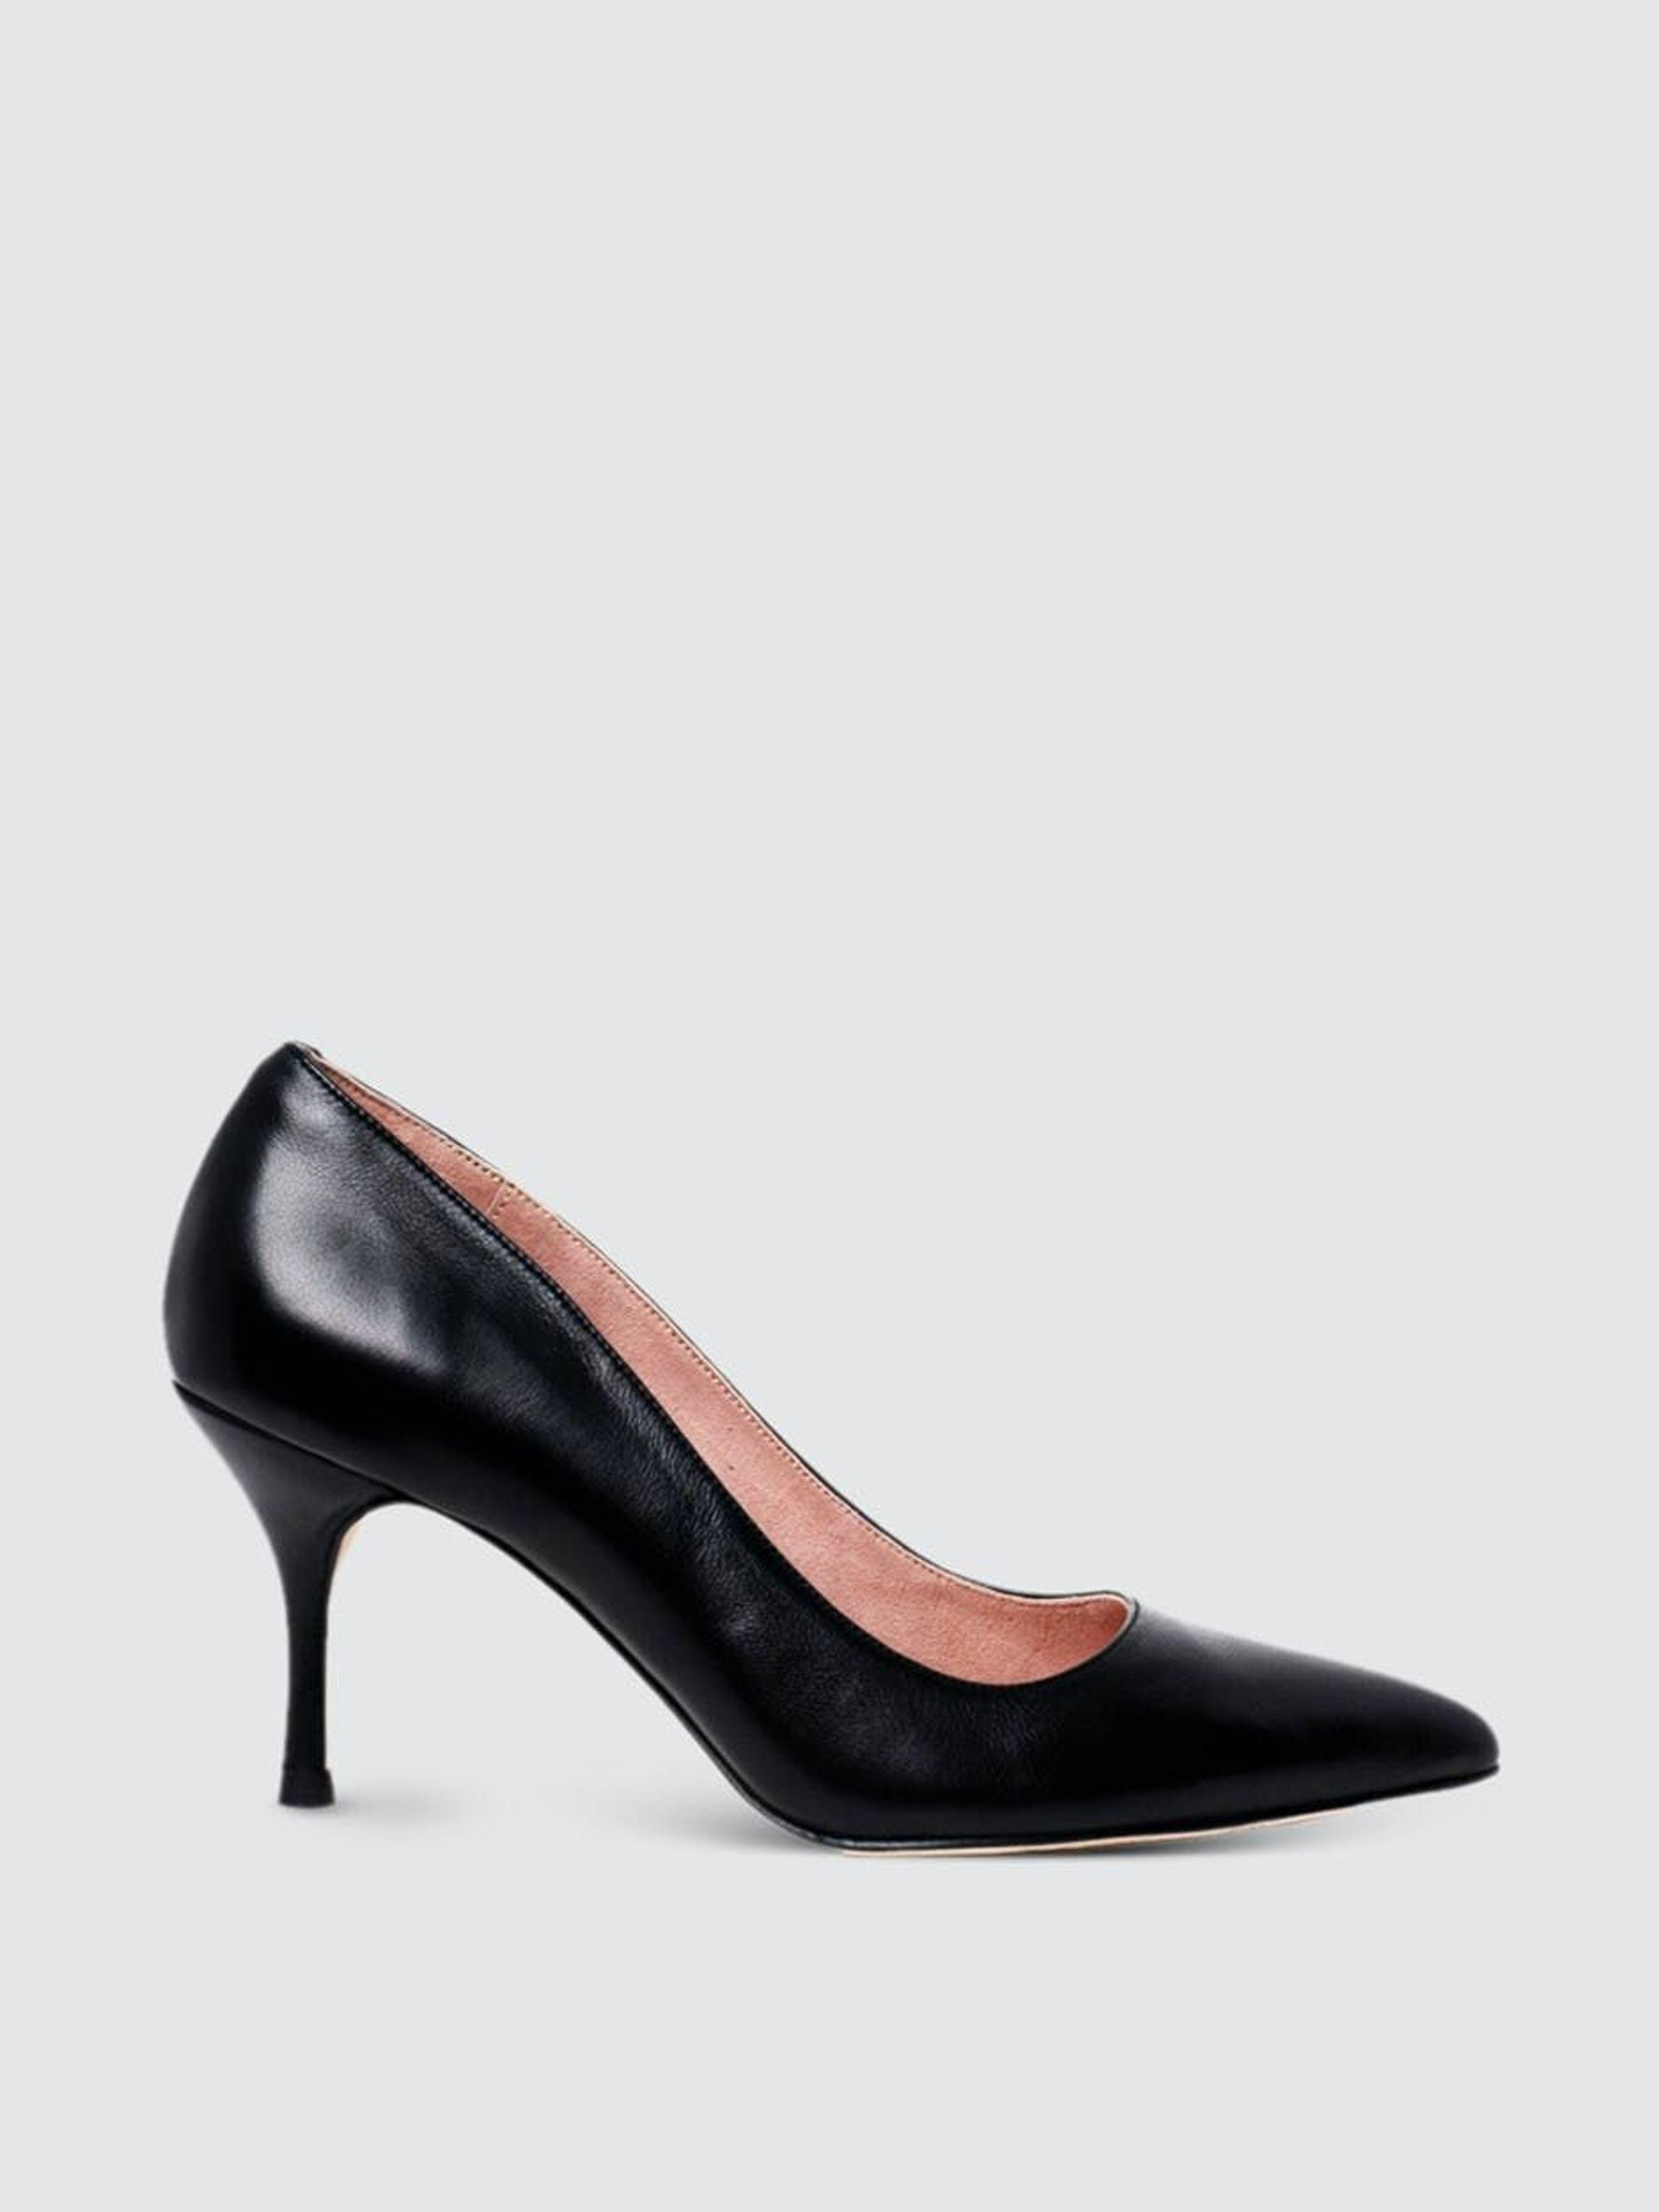 Ally Shoes Black Leather Pump | Lyst